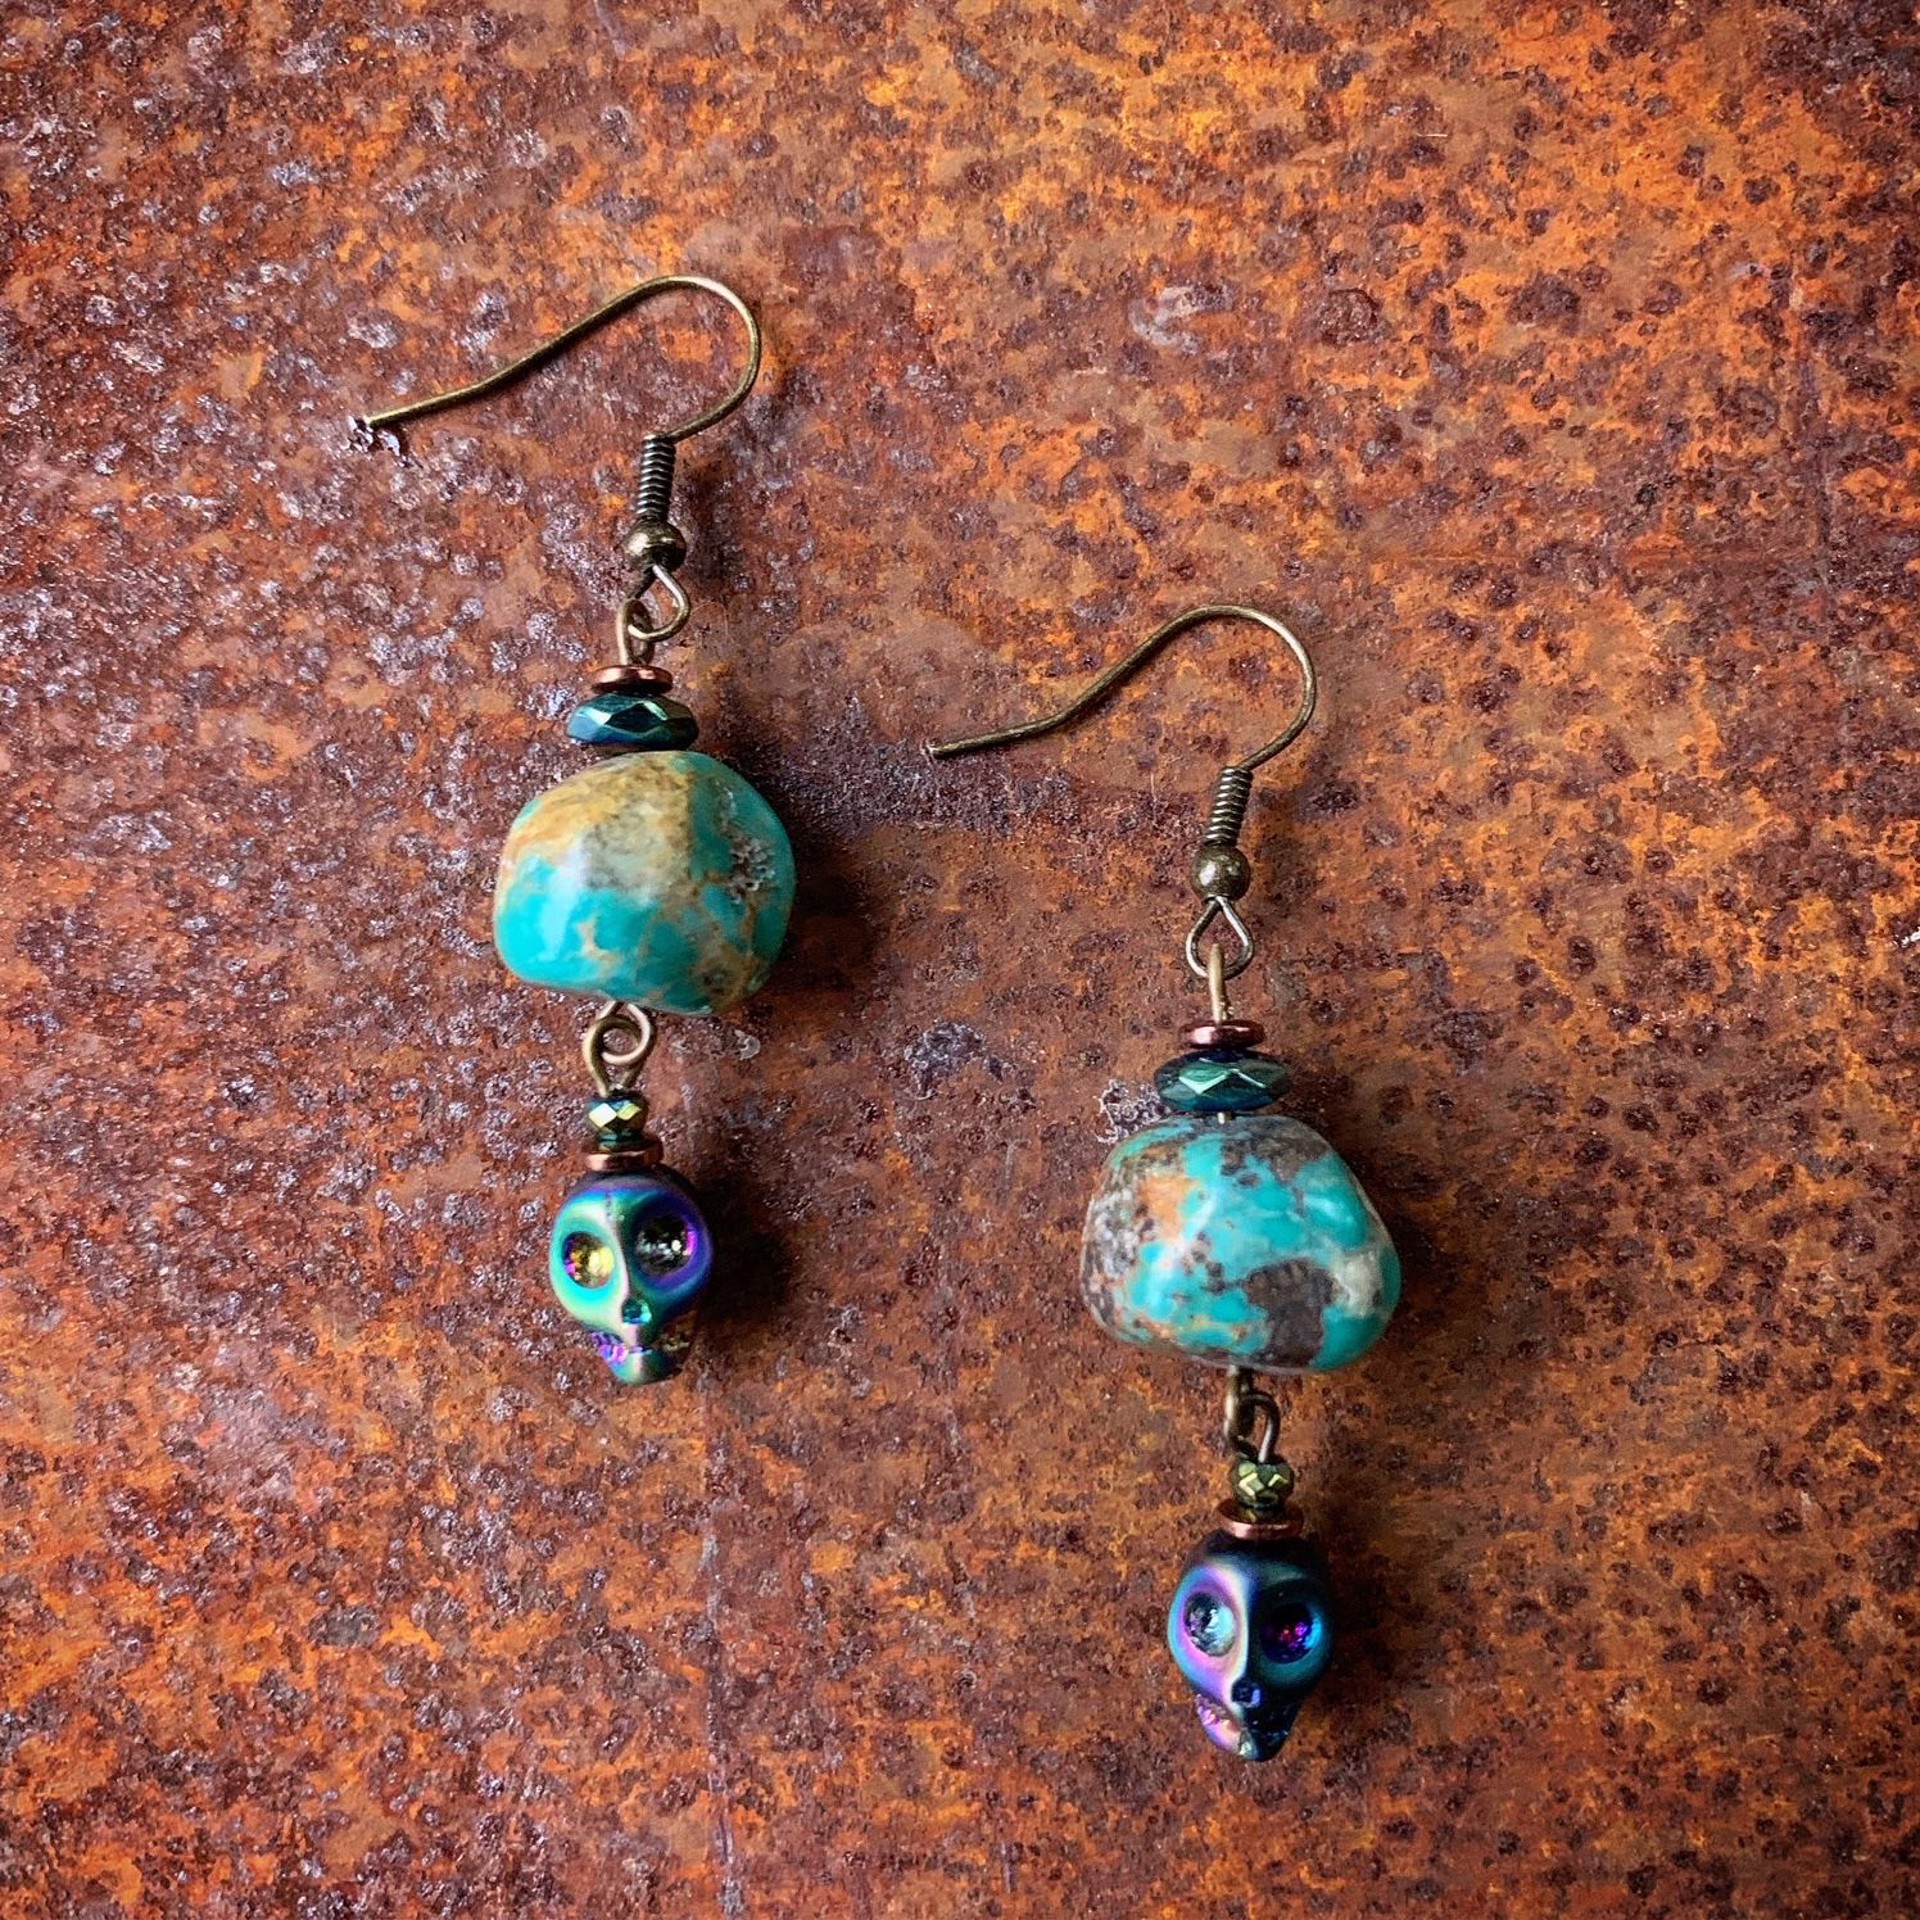 K556 Turquoise and Skull Earrings by Kelly Ormsby